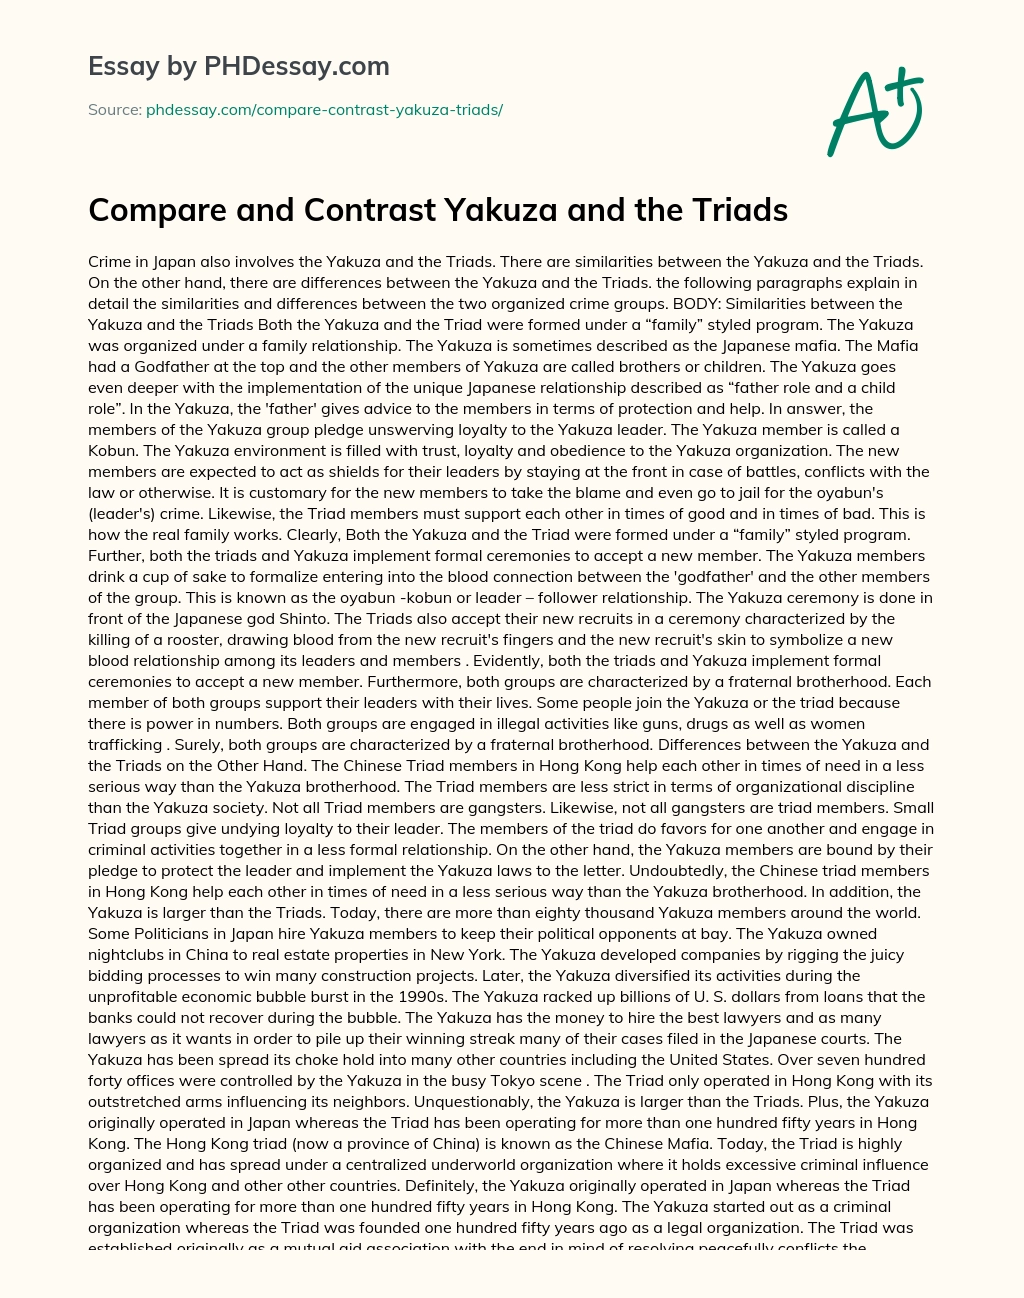 Compare and Contrast Yakuza and the Triads essay